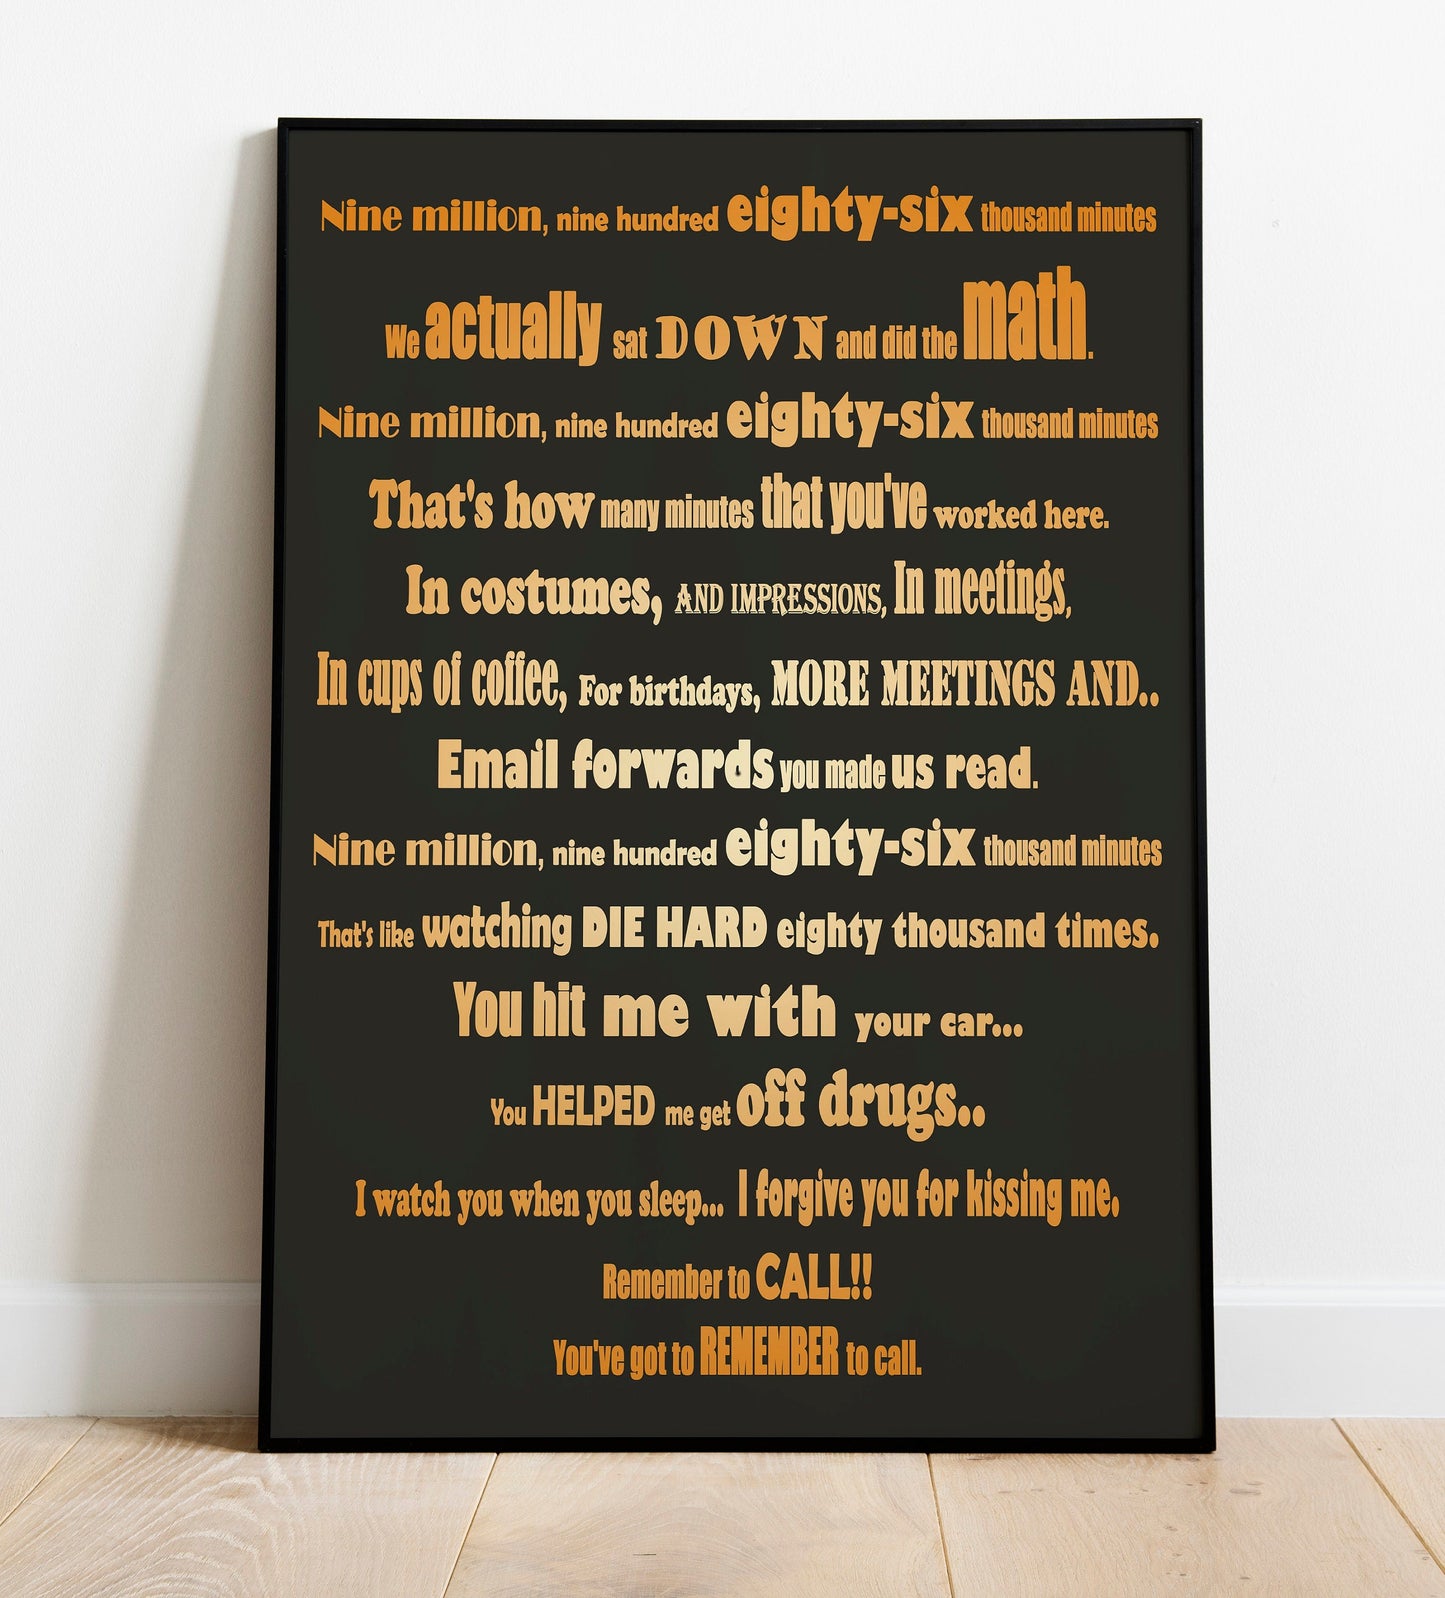 The Office (US) 9,986,000 minutes Poster